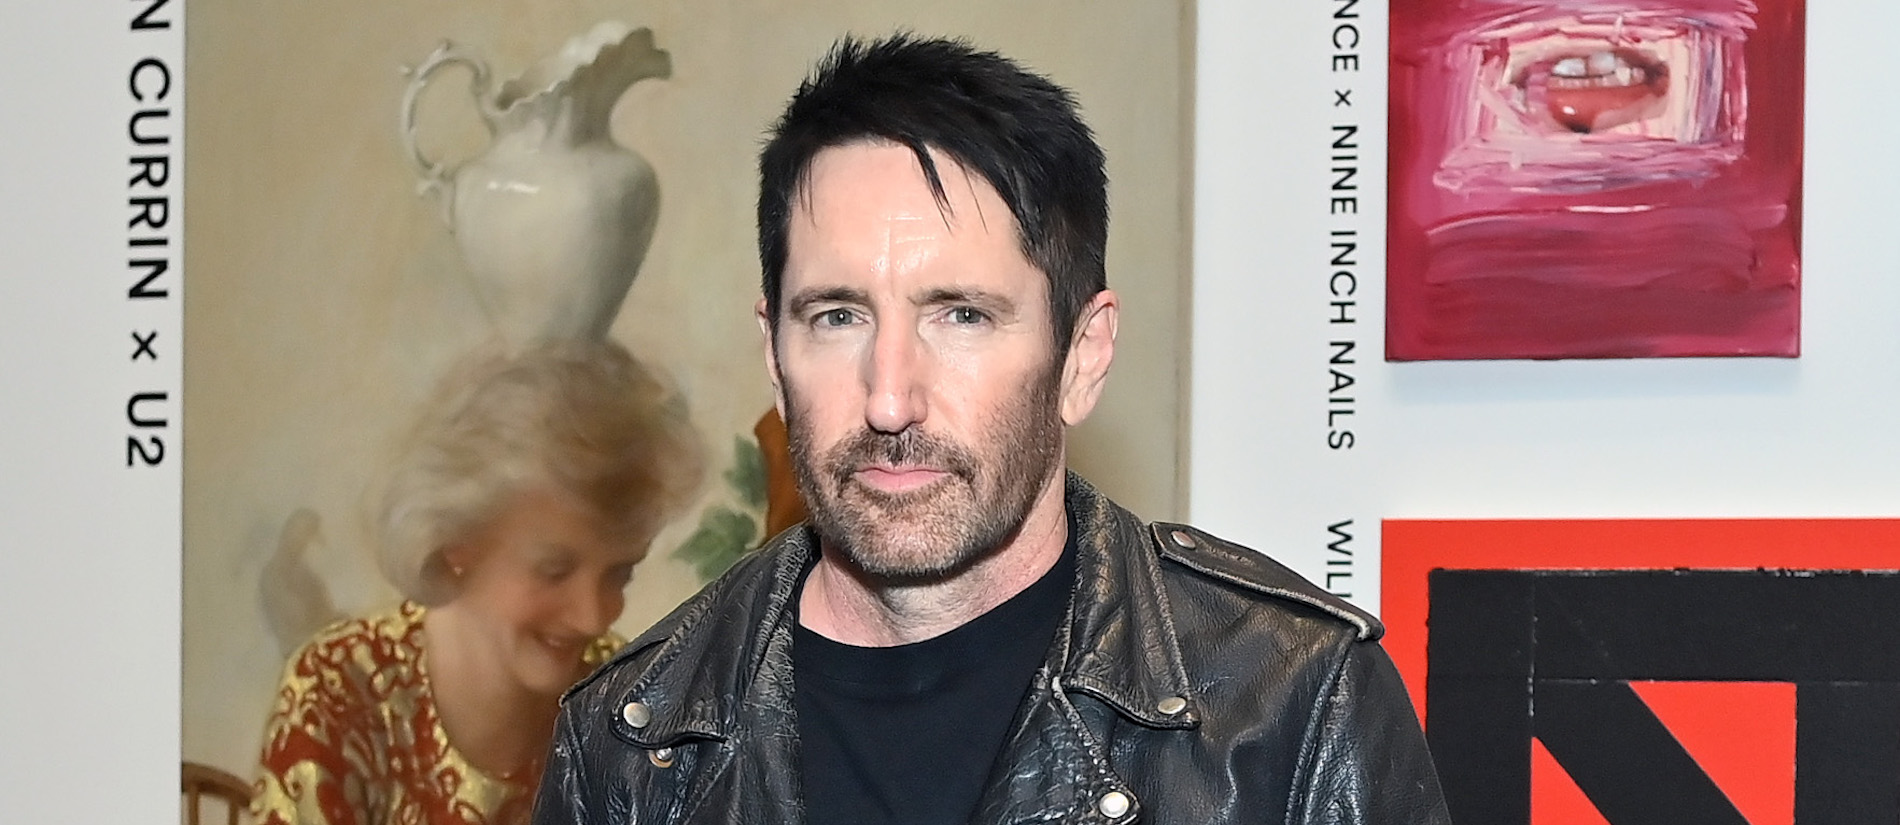 NINE INCH NAILS' Trent Reznor Changes His Tune on the Rock & Roll Hall of  Fame After Attending Last Year